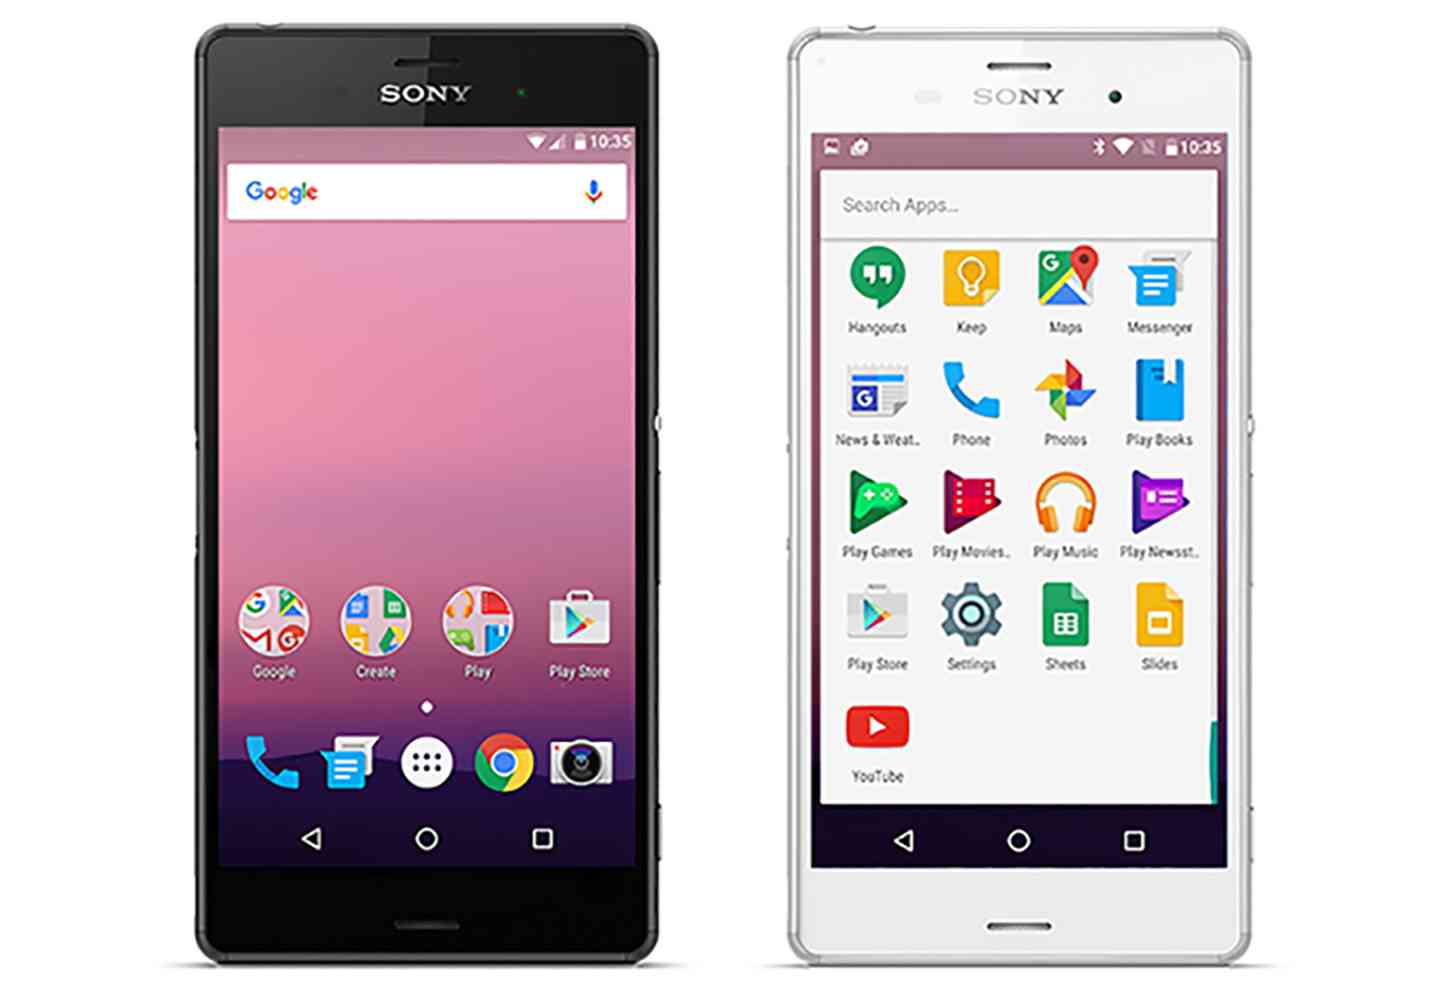 Android N Developer Preview Sony Xperia Z3 large